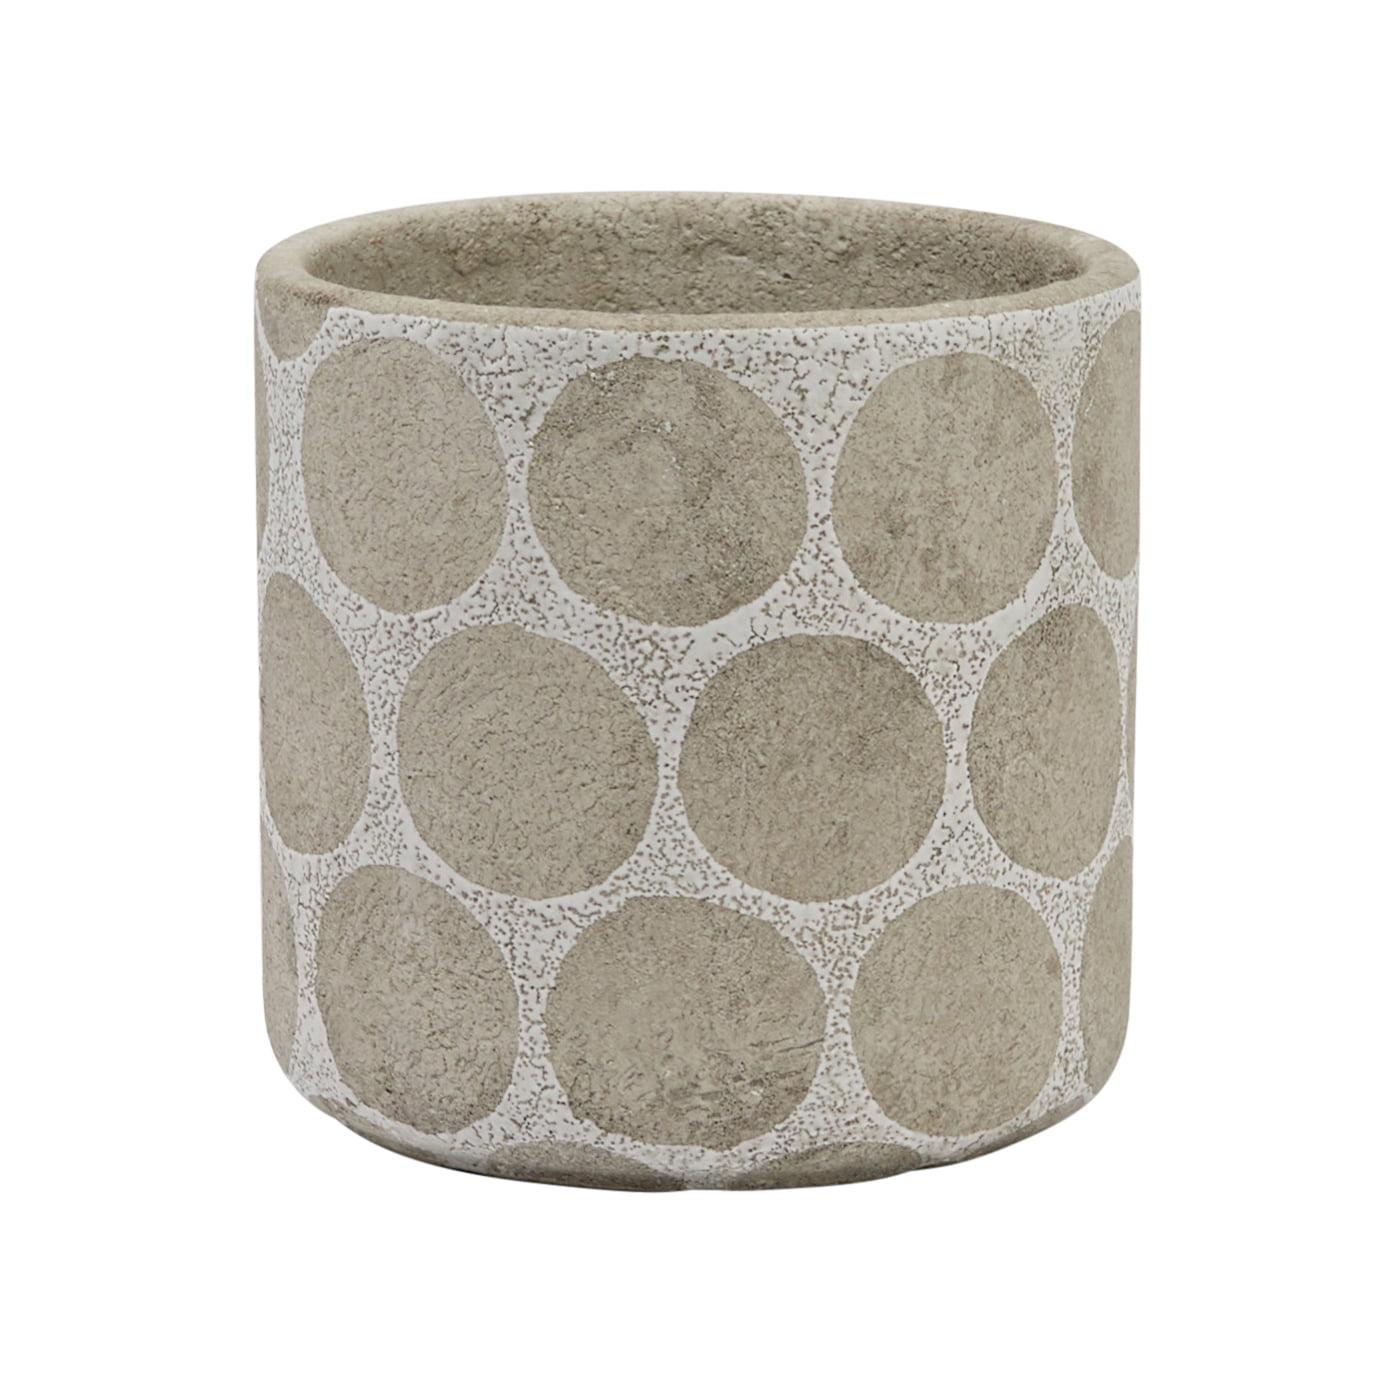 Sleek Terra-cotta Round Planter with Wax Relief Dots, White and Cement